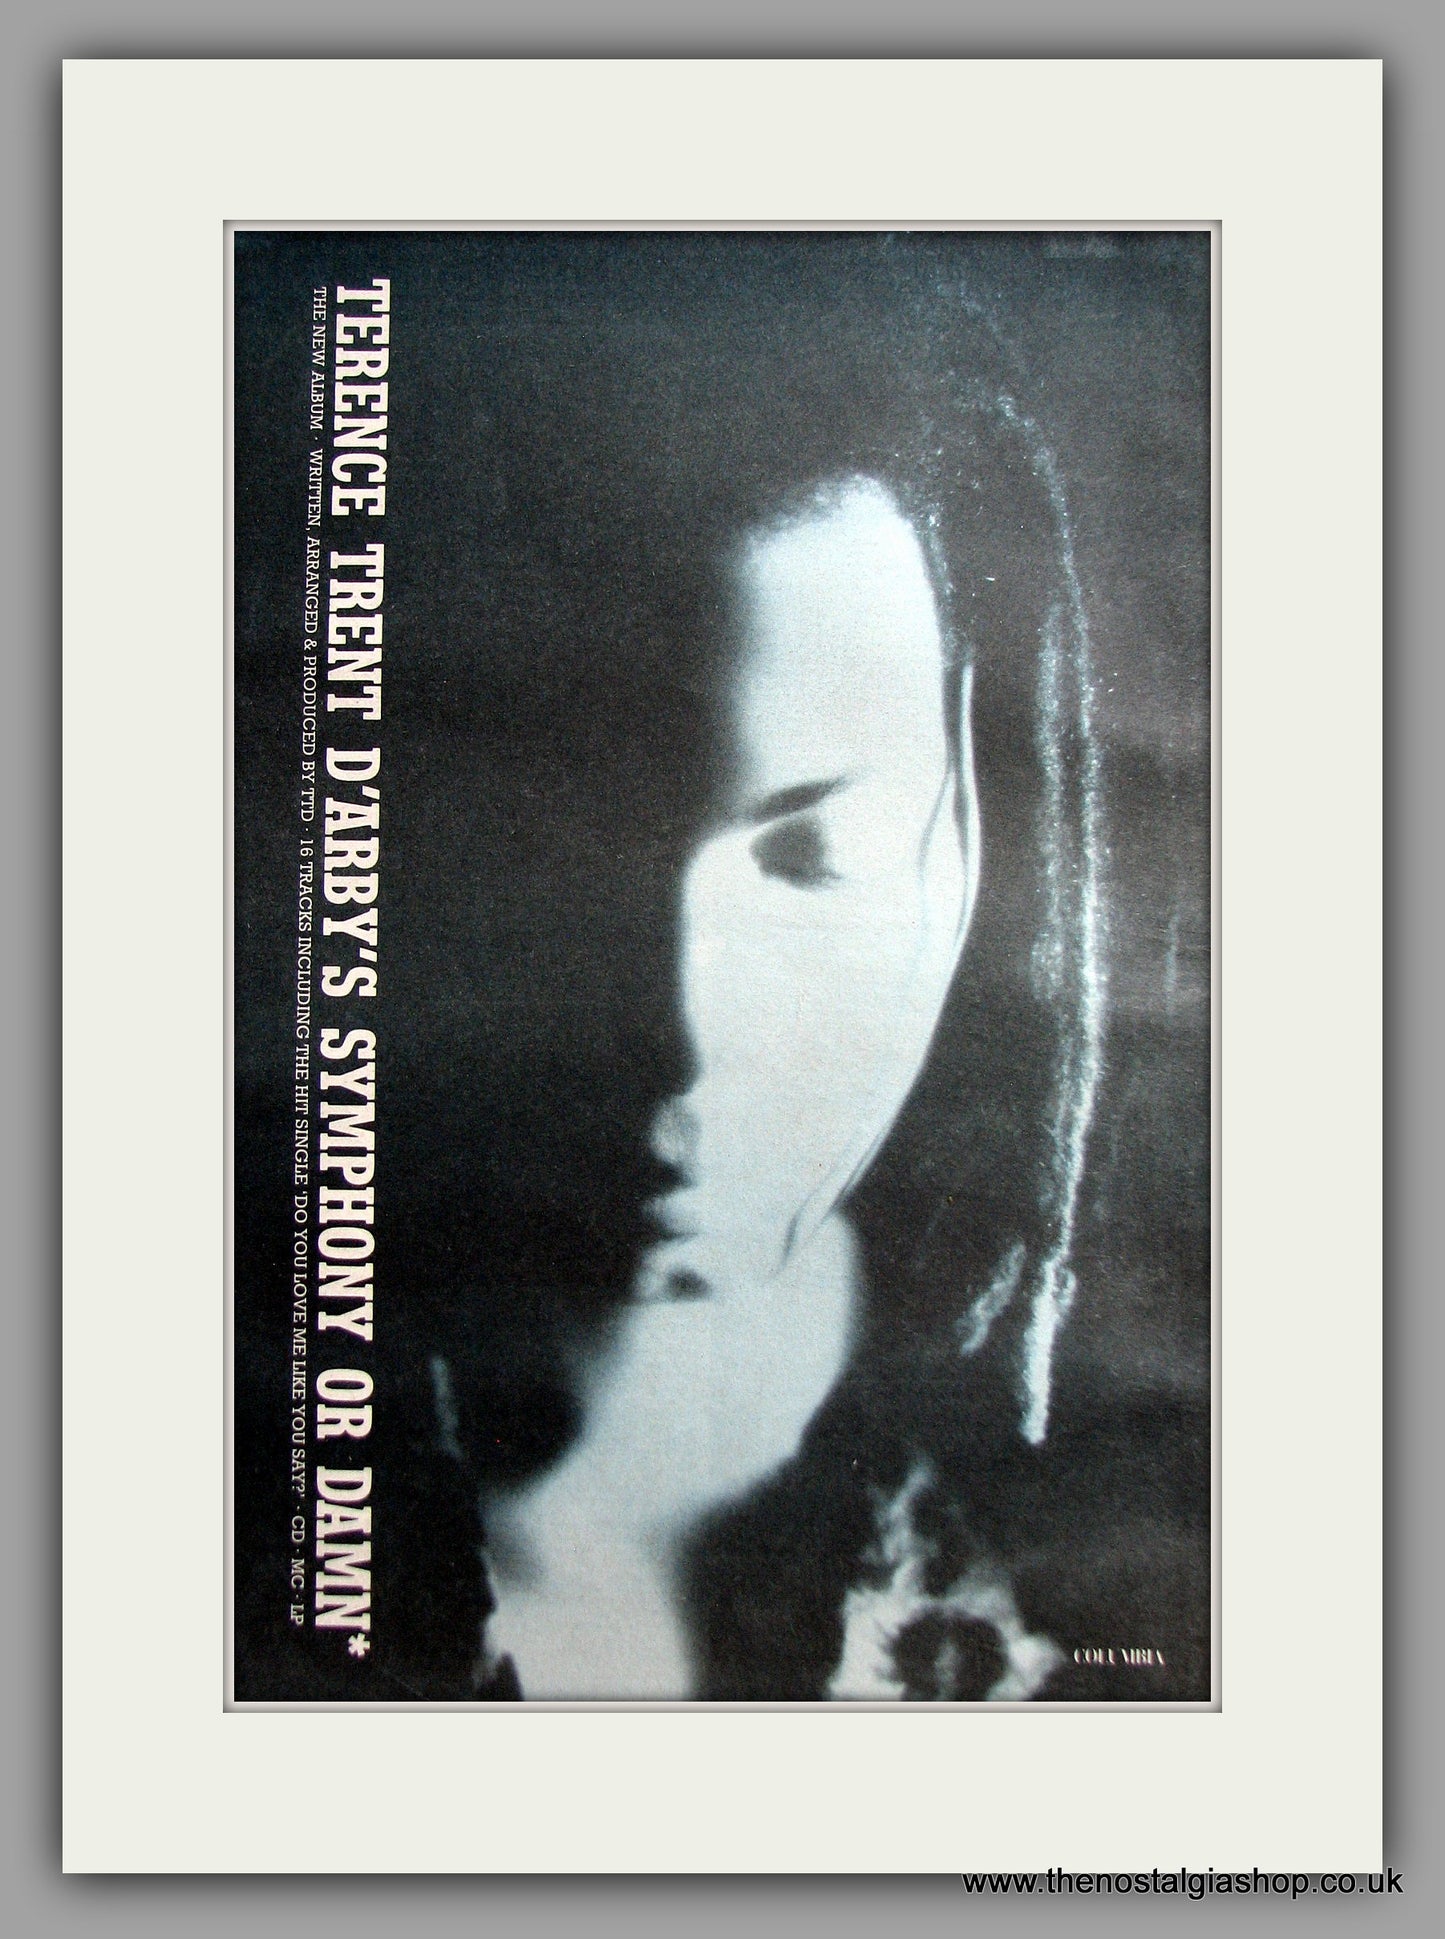 Terence Trent Darby - Symphony Or Damn. Original Vintage Advert 1993 (ref AD11134)